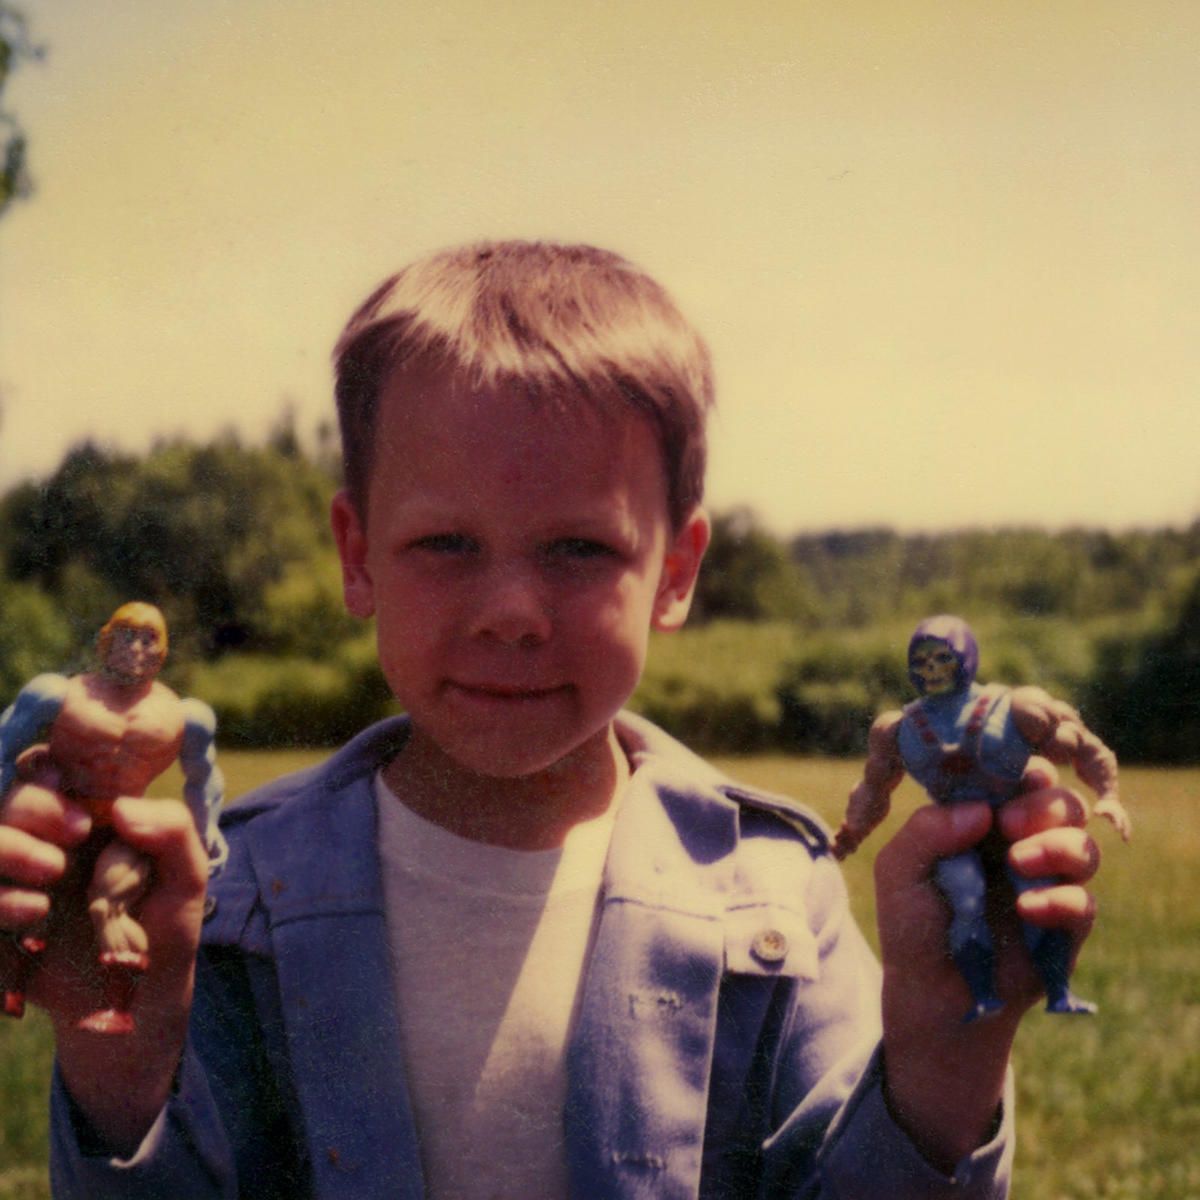 John Cena playing with WWE action figures as a child